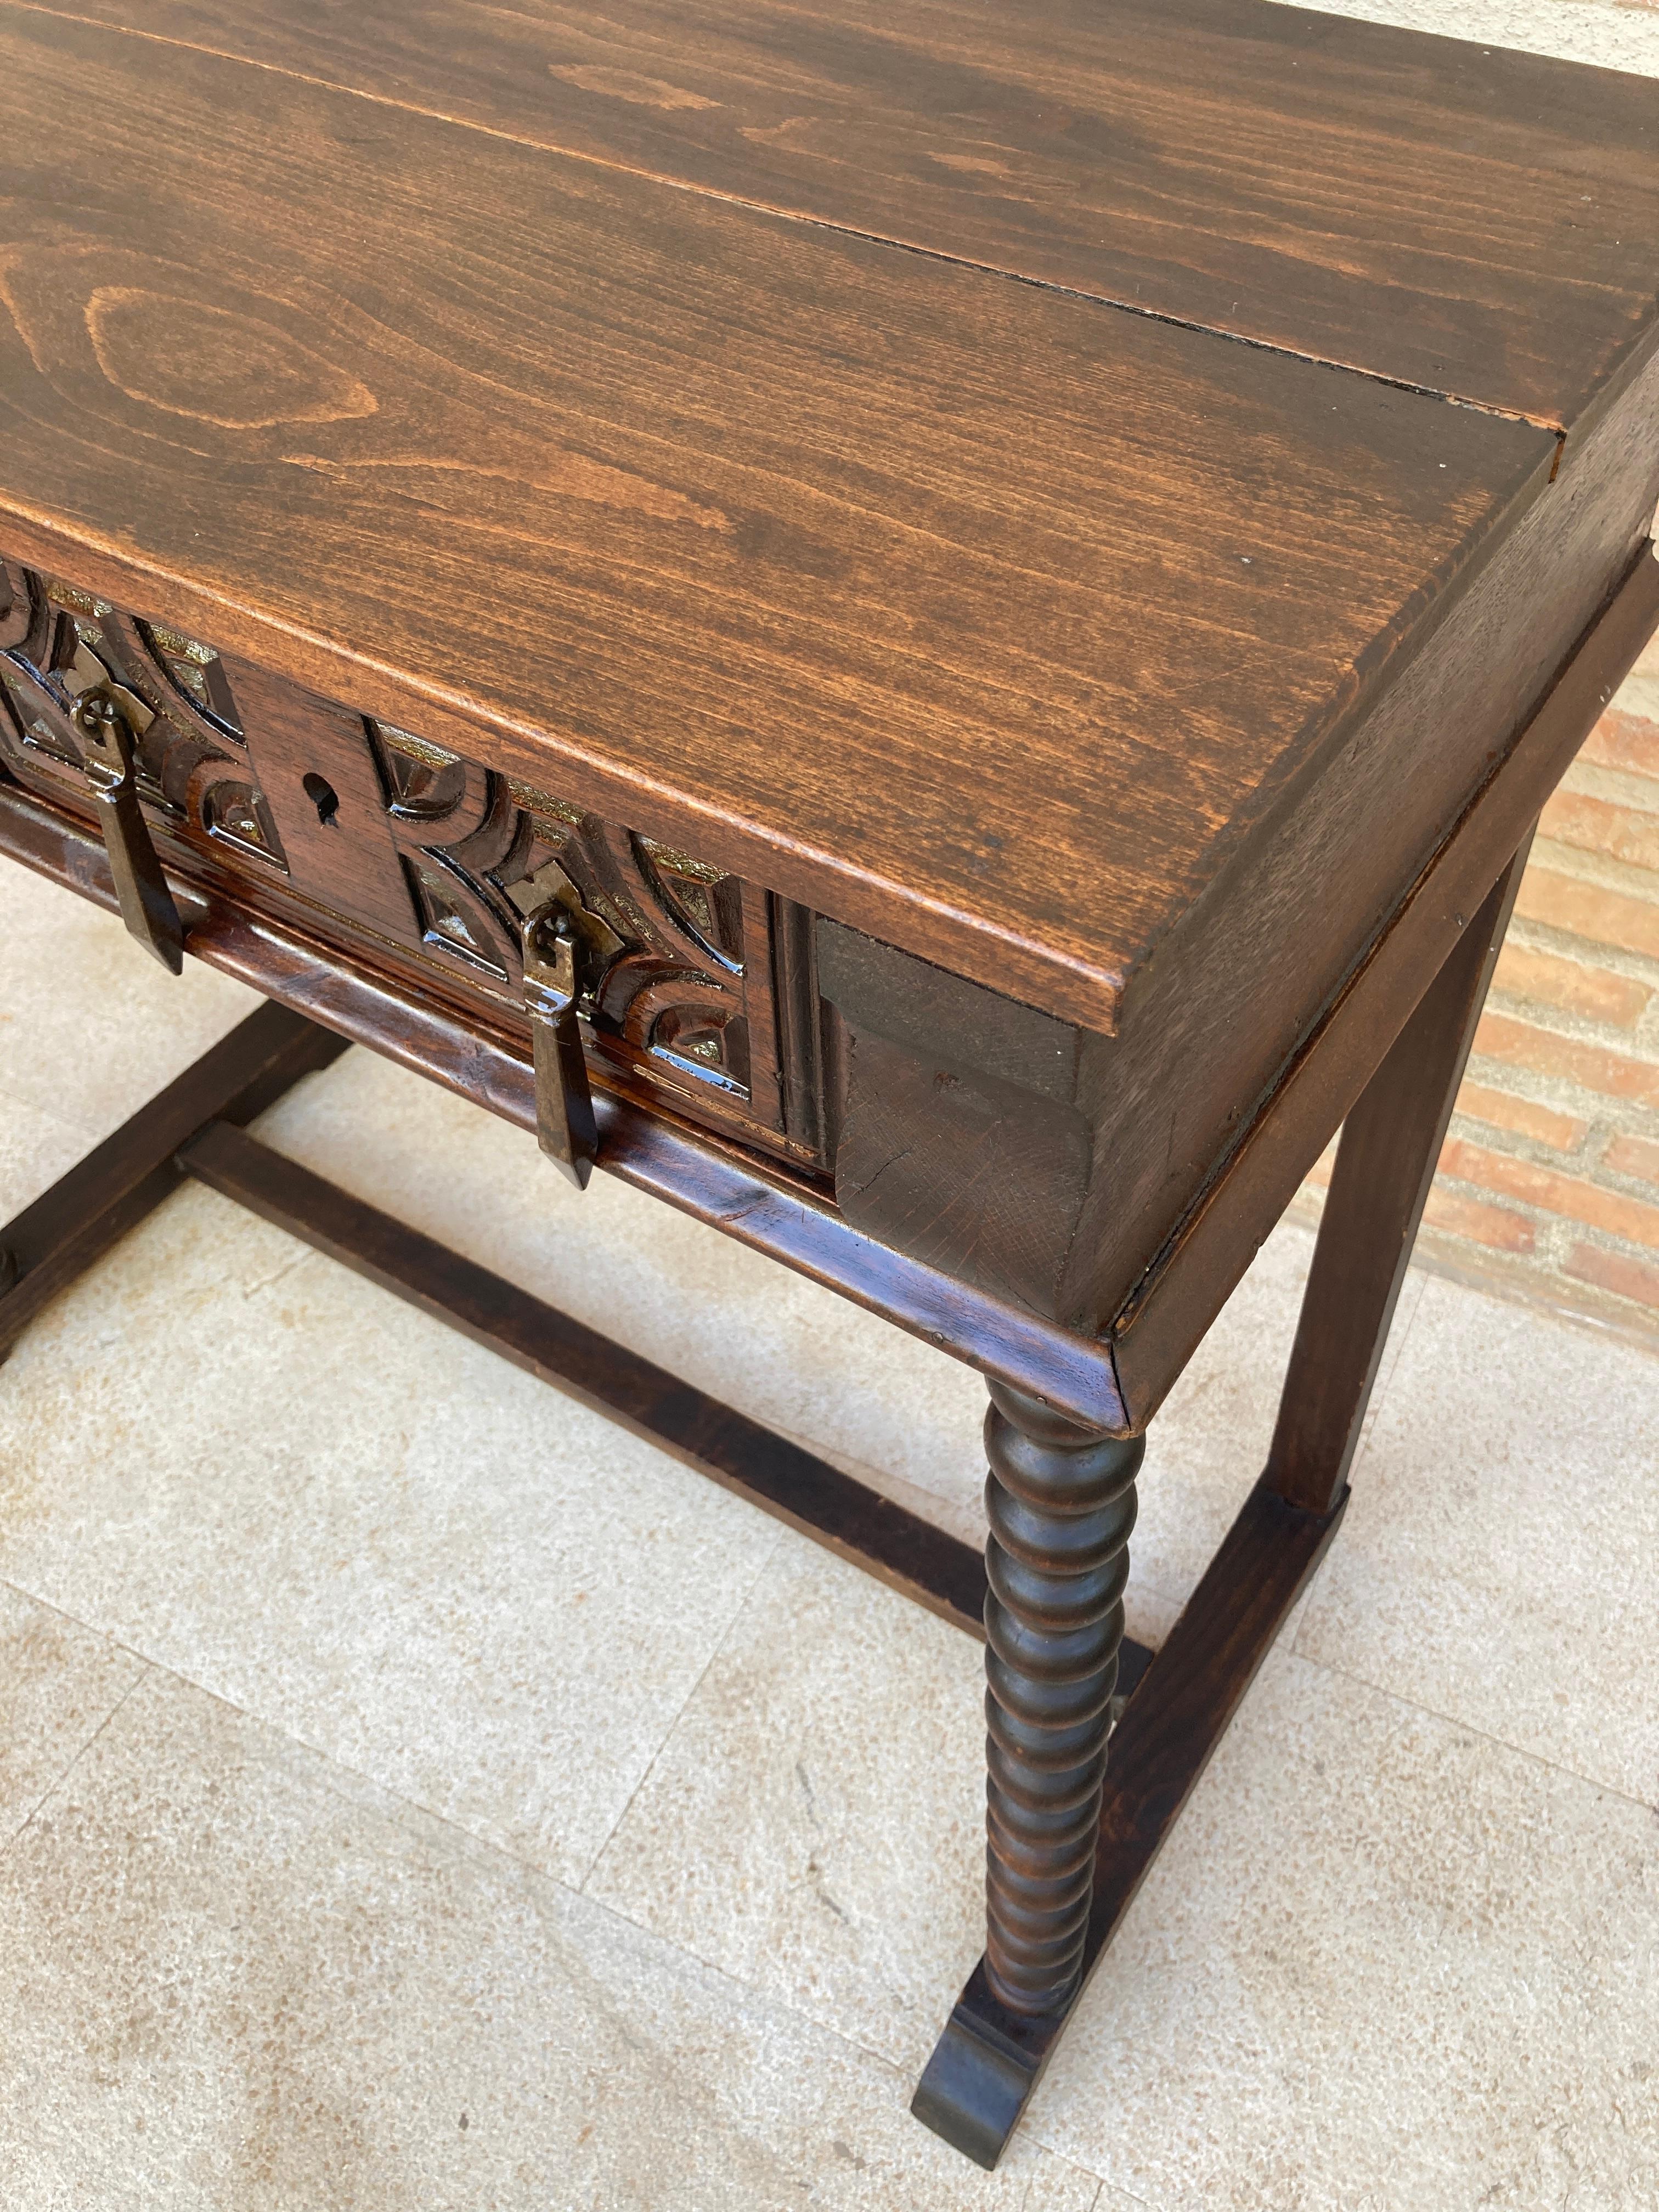 Spanish Console or Desk Table with Drawers and Solomonic Legs 4